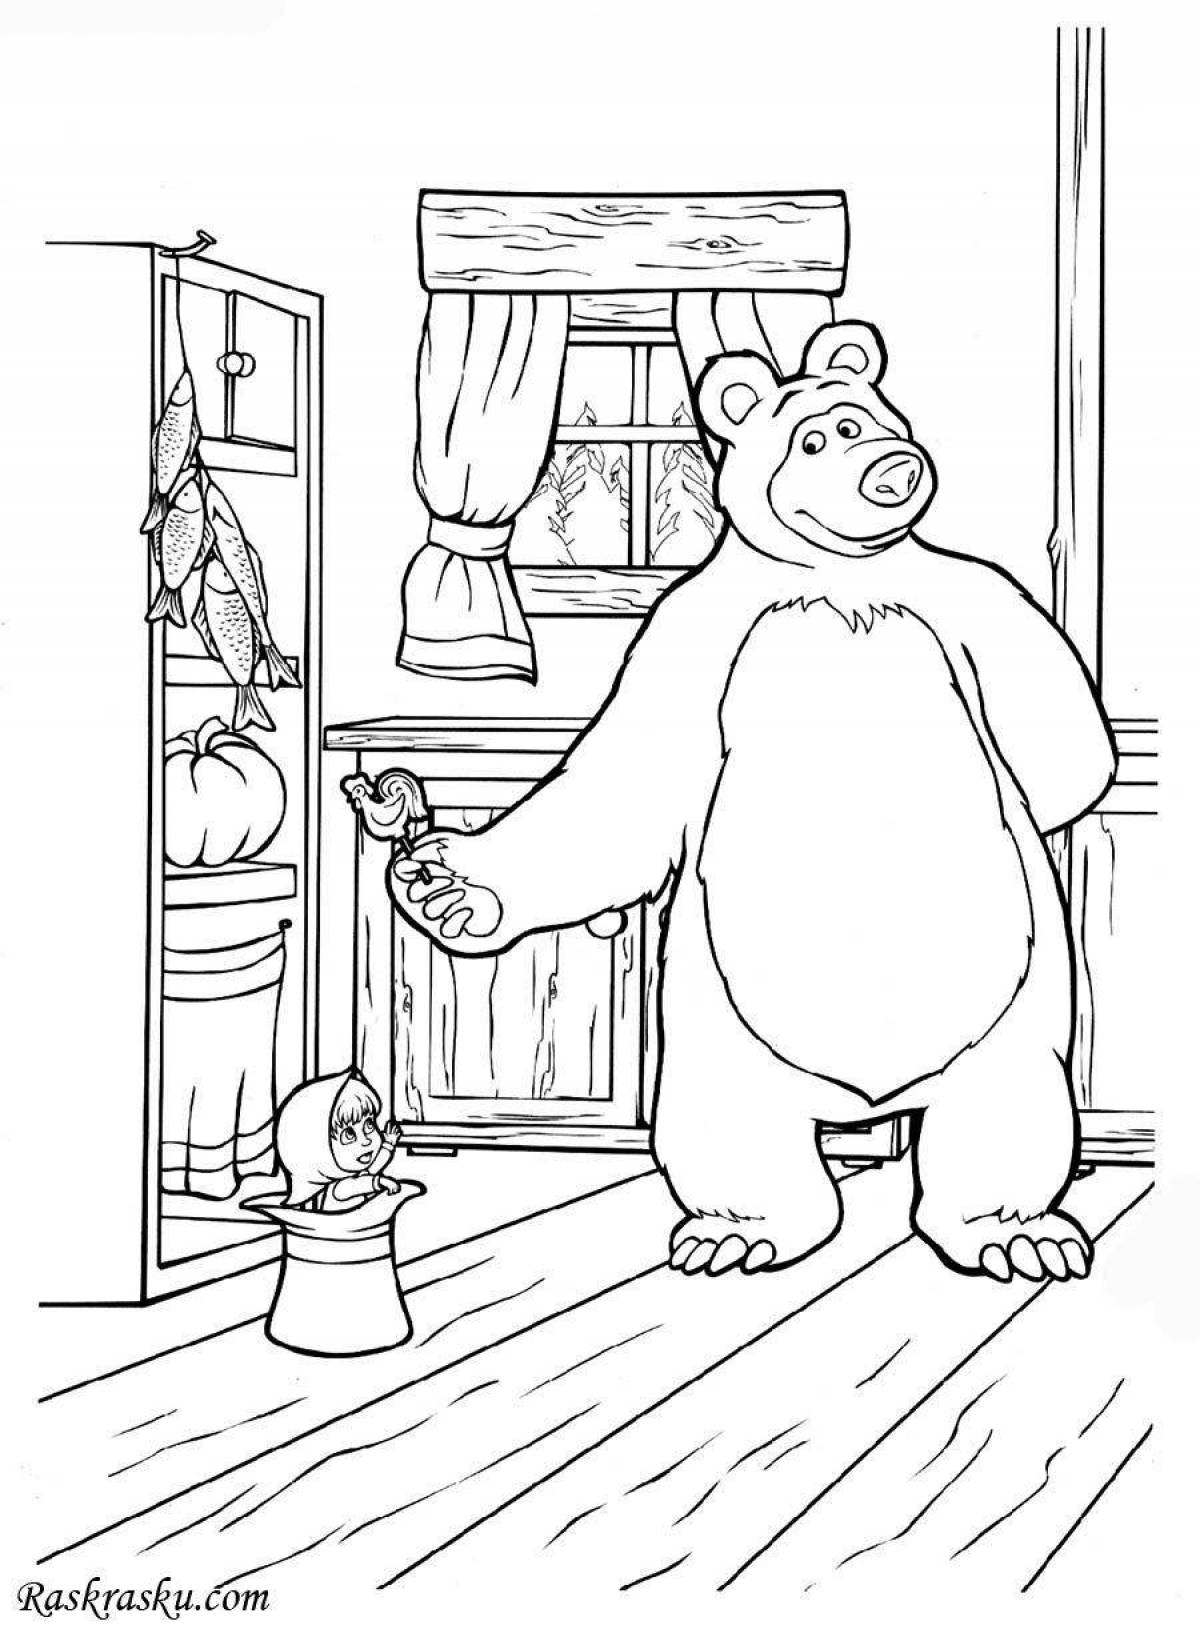 Fancy coloring of a teddy bear from masha and a bear